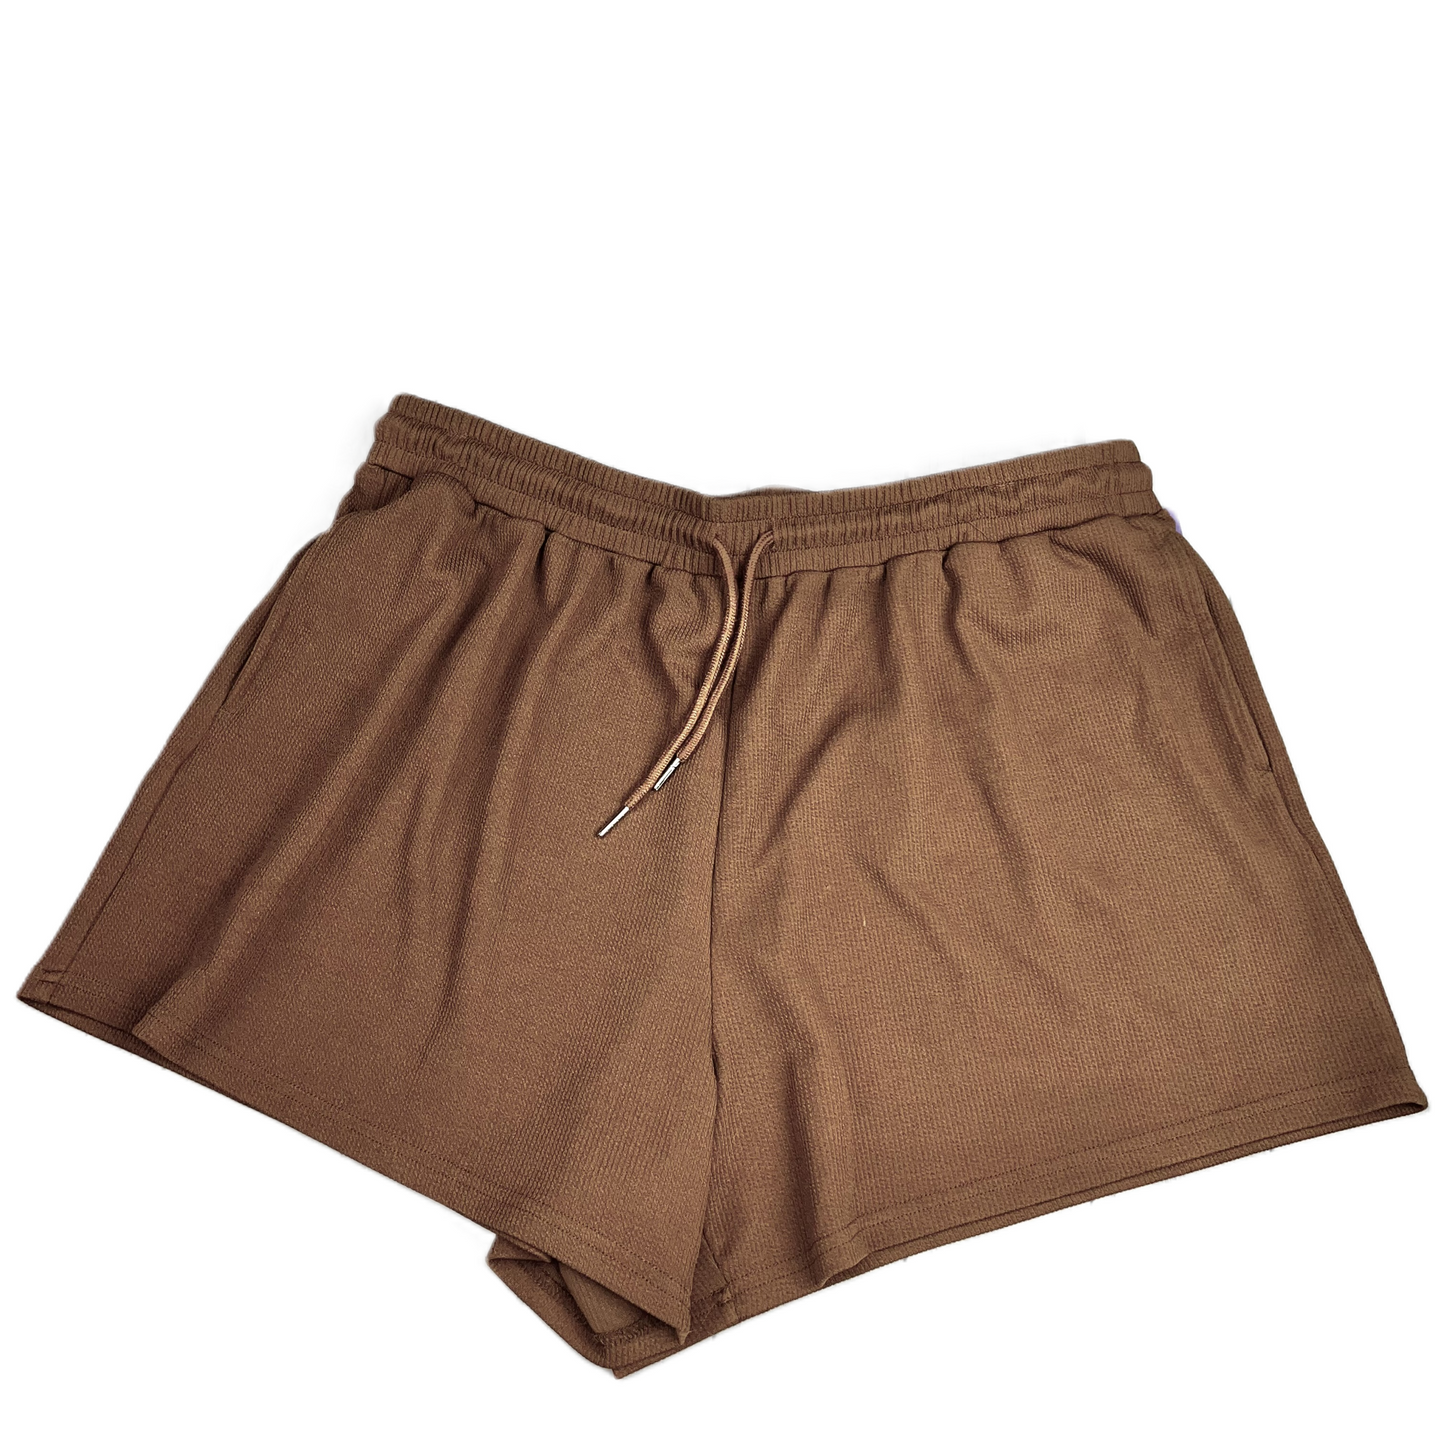 Brown Shorts By Shein, Size: 3x